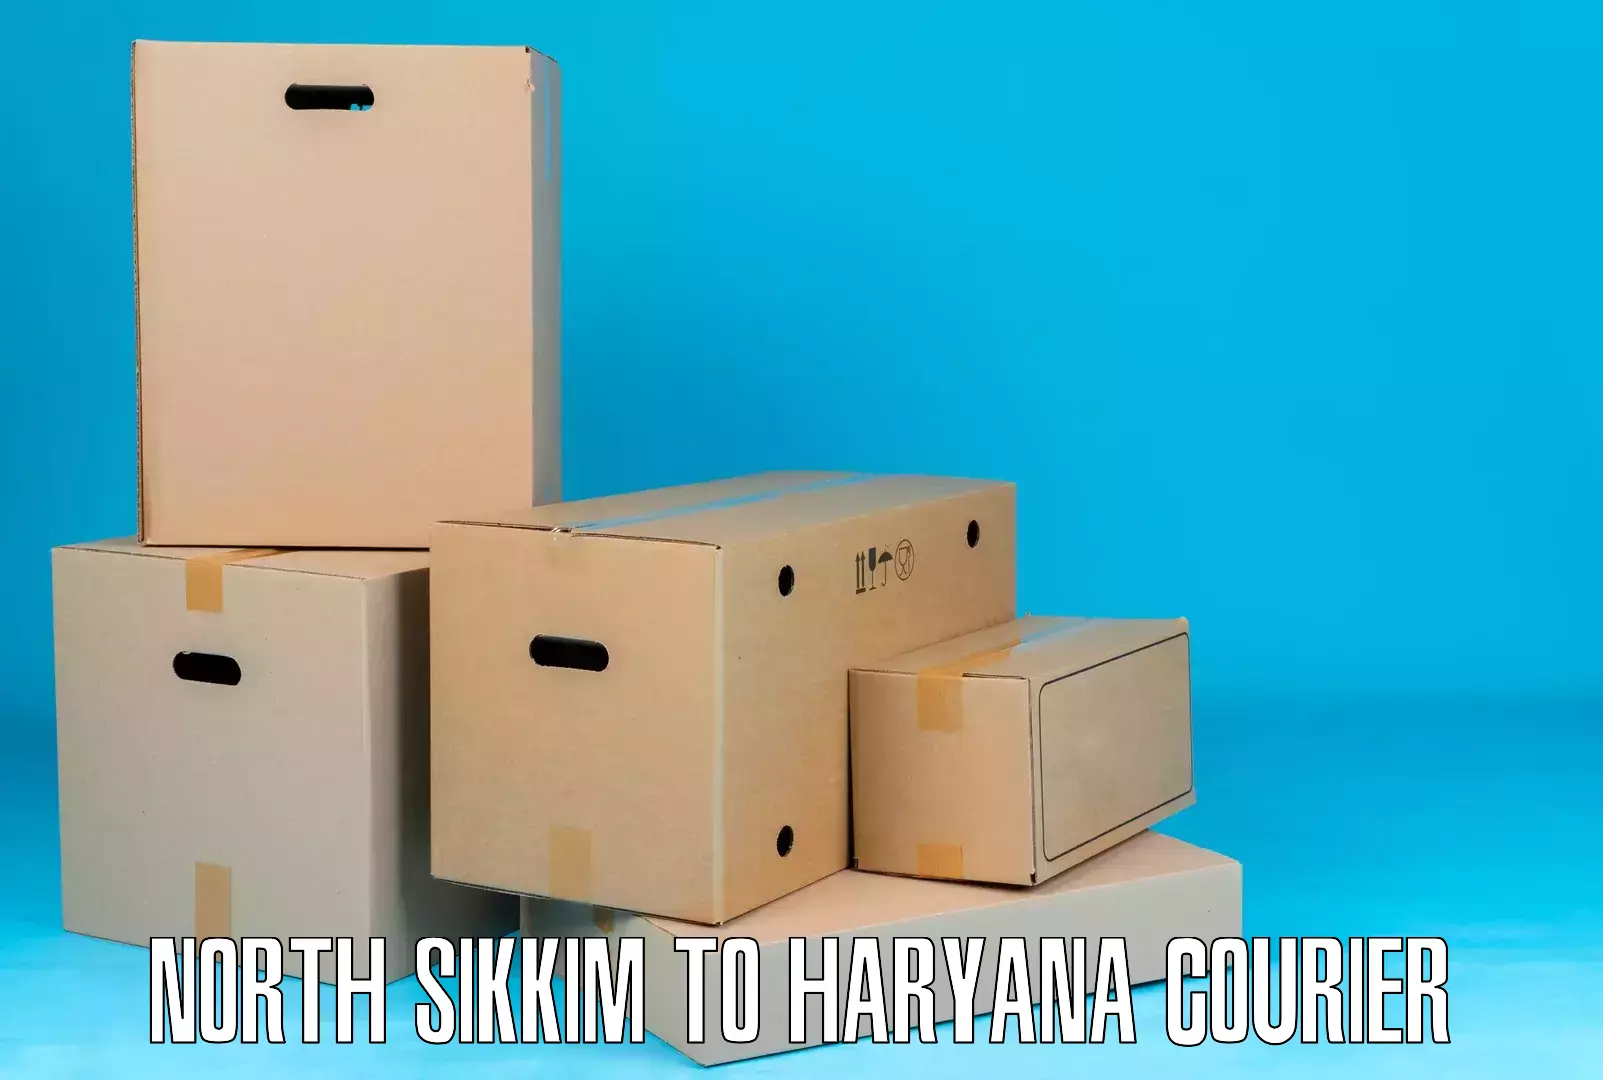 Courier app in North Sikkim to Gurgaon